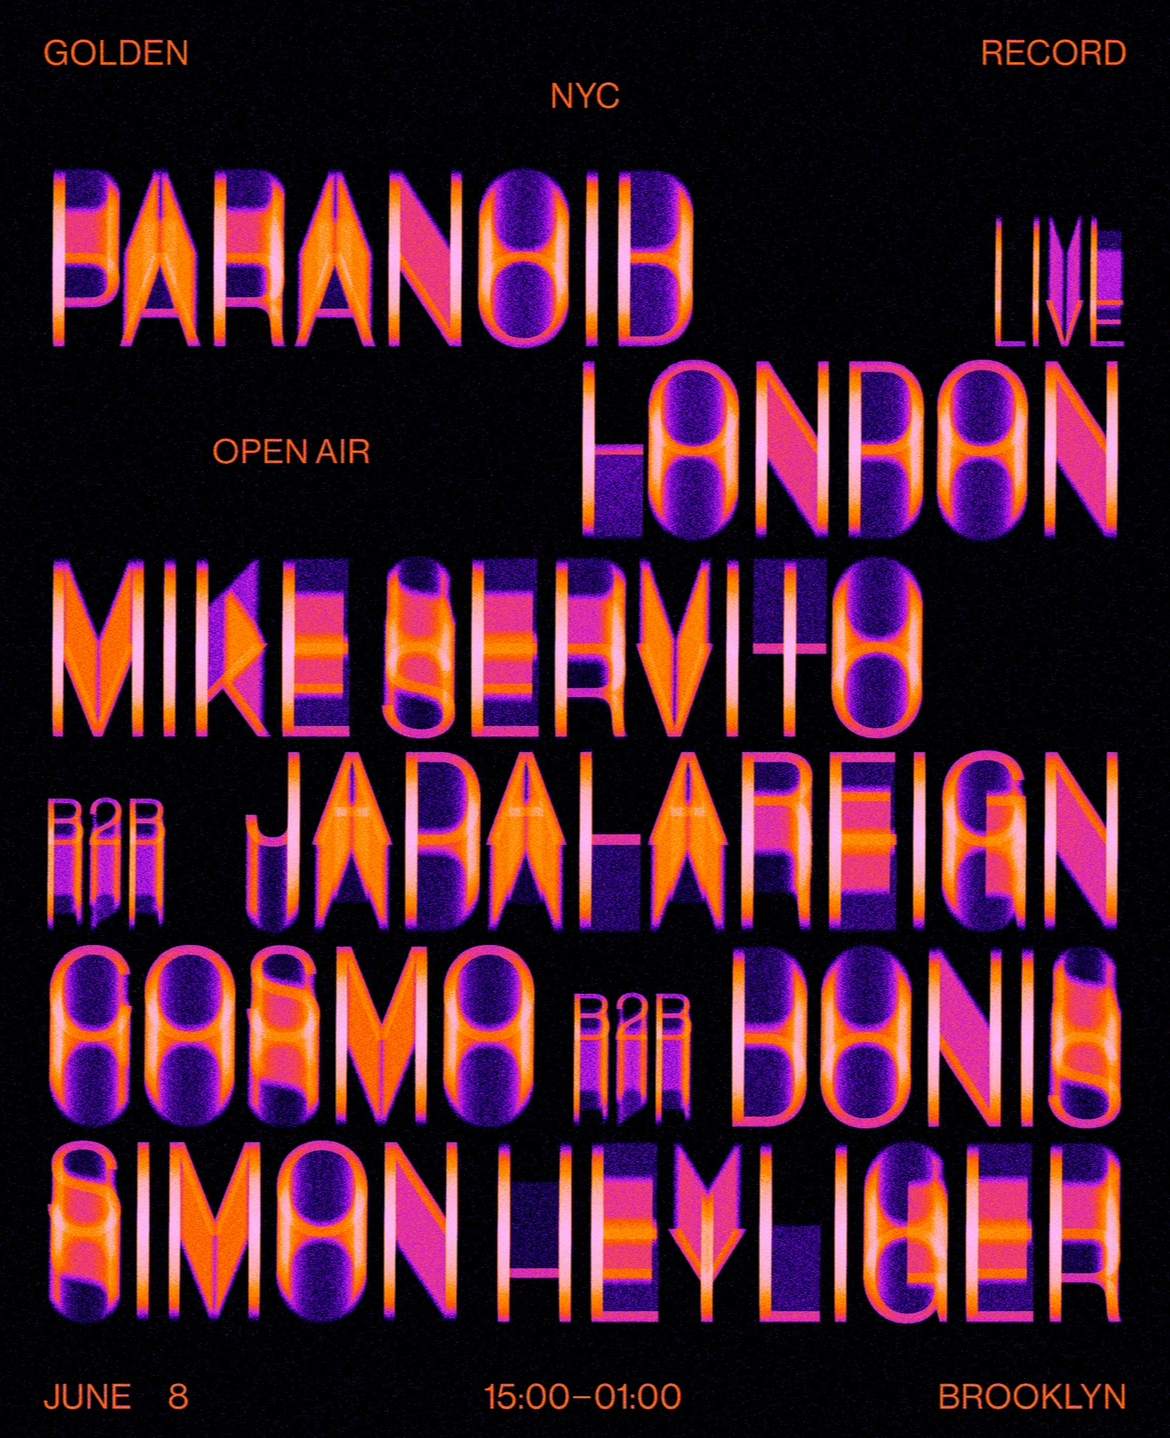 Golden Record NYC presents Paranoid London (LIVE), Mike Servito, JADALREIGN - フライヤー表